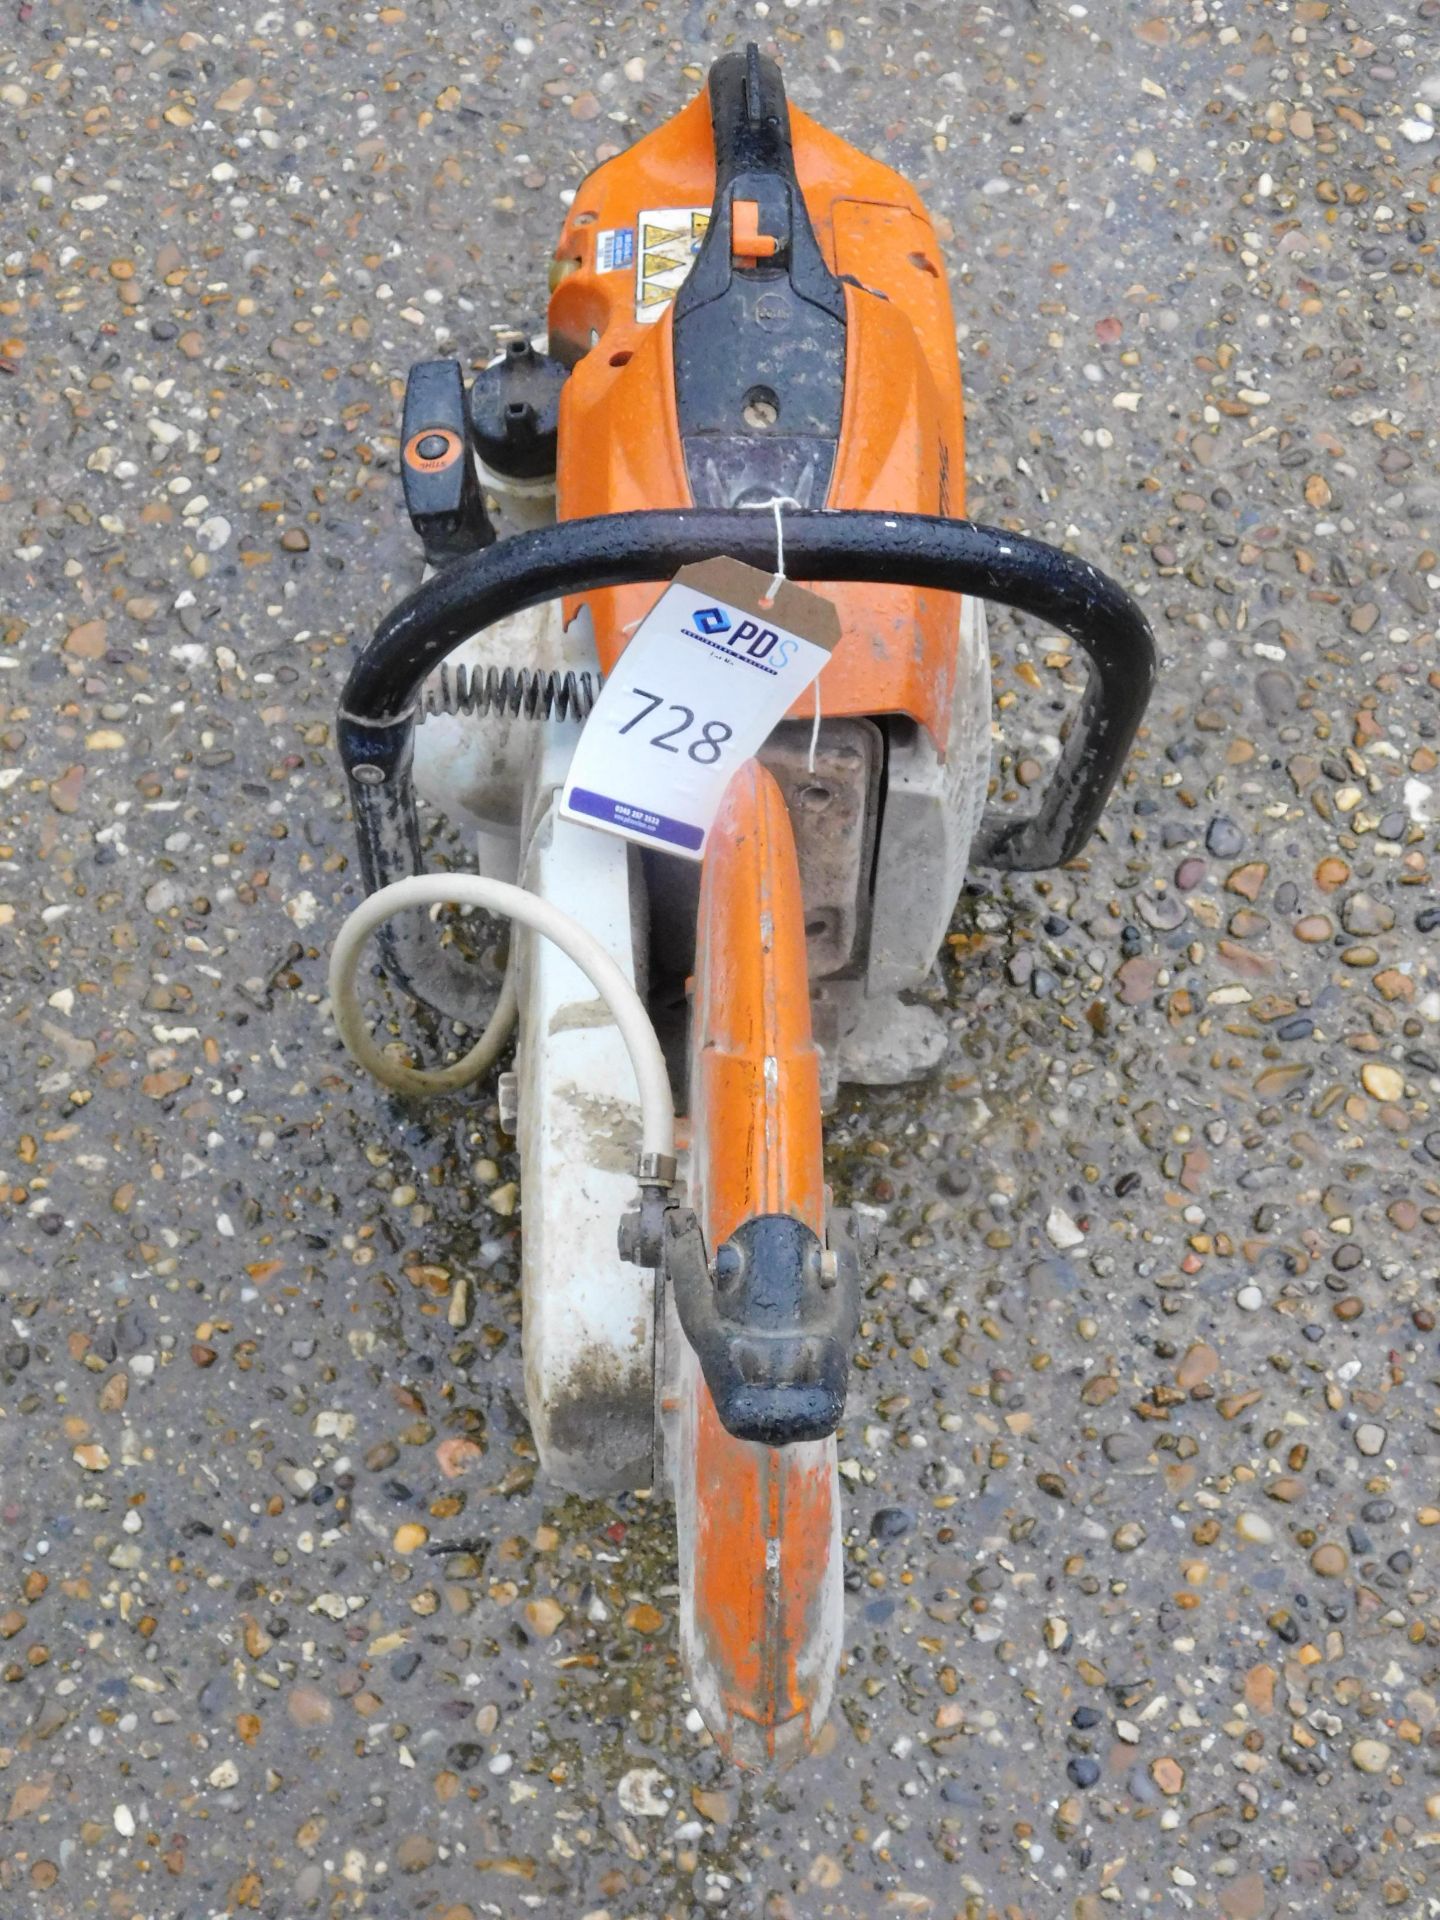 Stihl TS500i Petrol Cut-Off Saw (Location: Brentwood. Please Refer to General Notes)